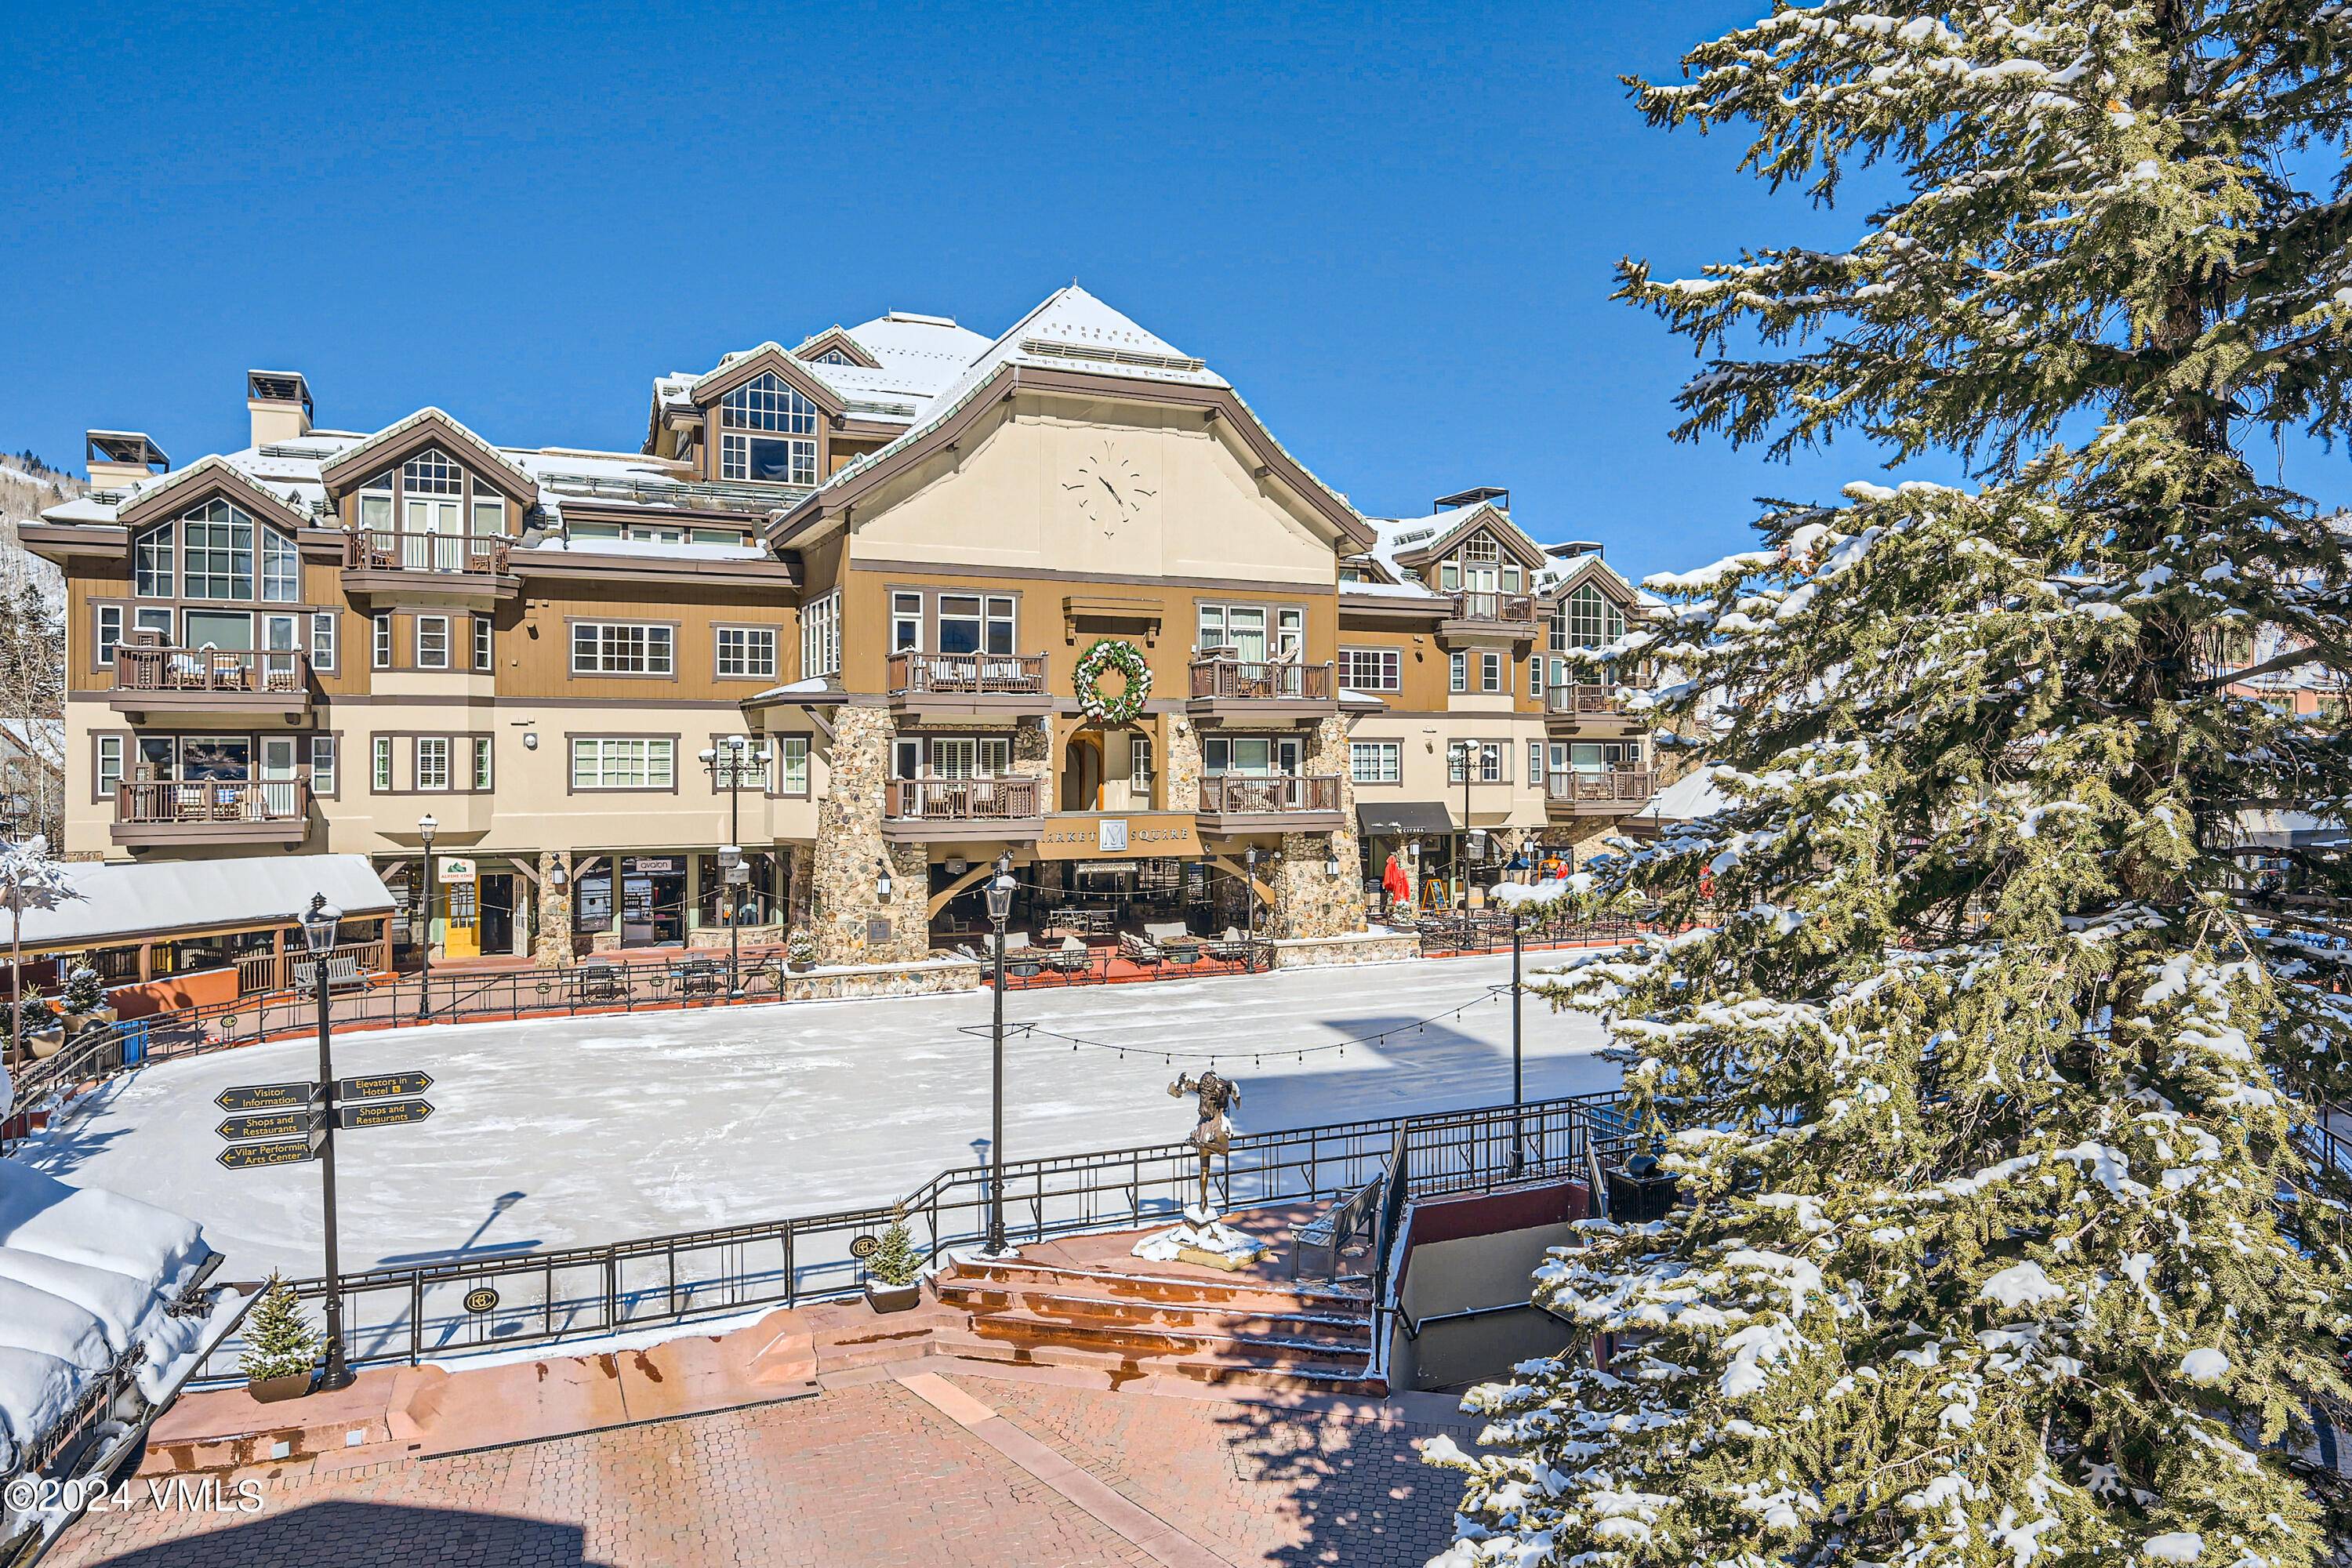 This wonderful Beaver Creek property is conveniently located in Market Square, just steps away from the ski slopes and ice skating rink, in the heart of vibrant Beaver Creek Village.